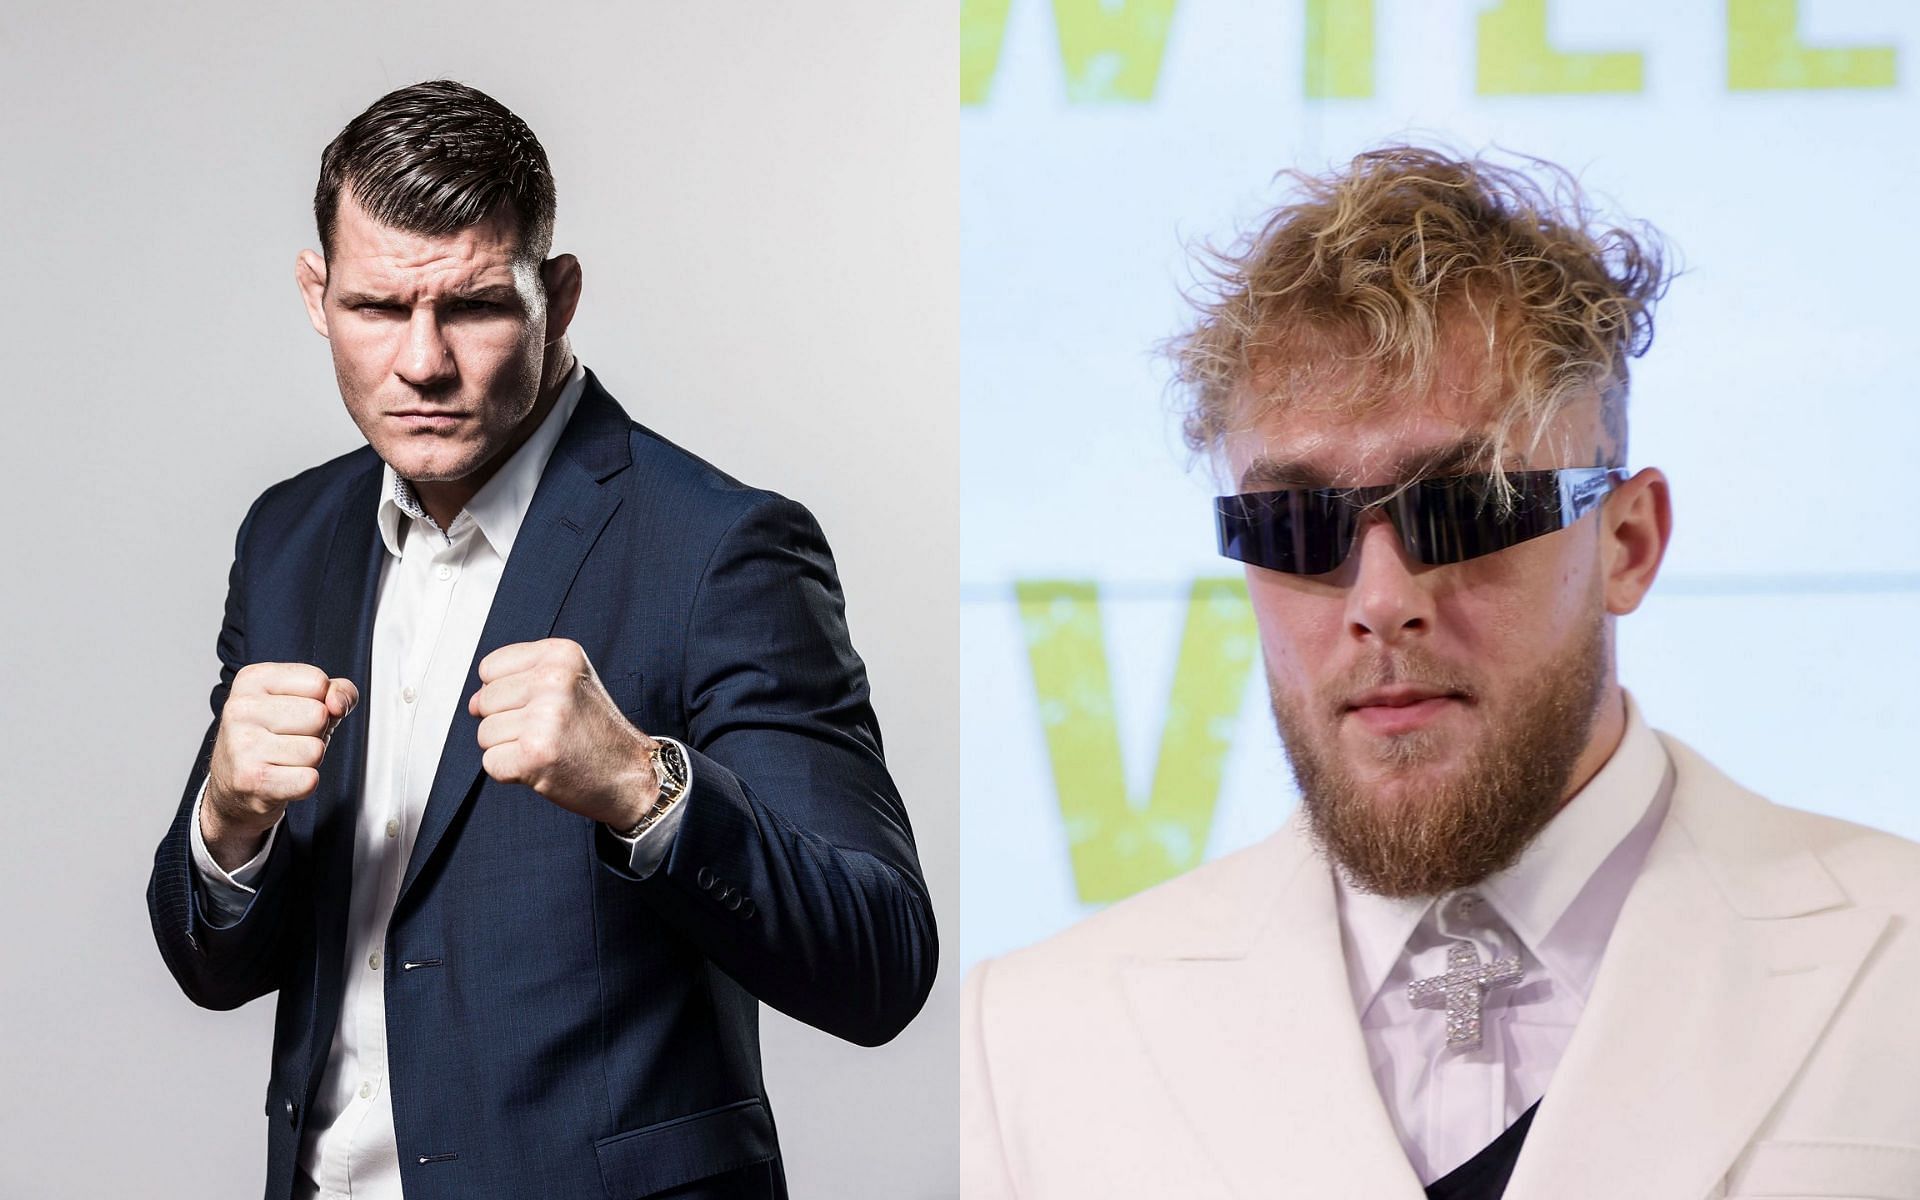 Michael Bisping has revealed that he believes Jake Paul will defeat Tommy Fury in their upcoming boxing match